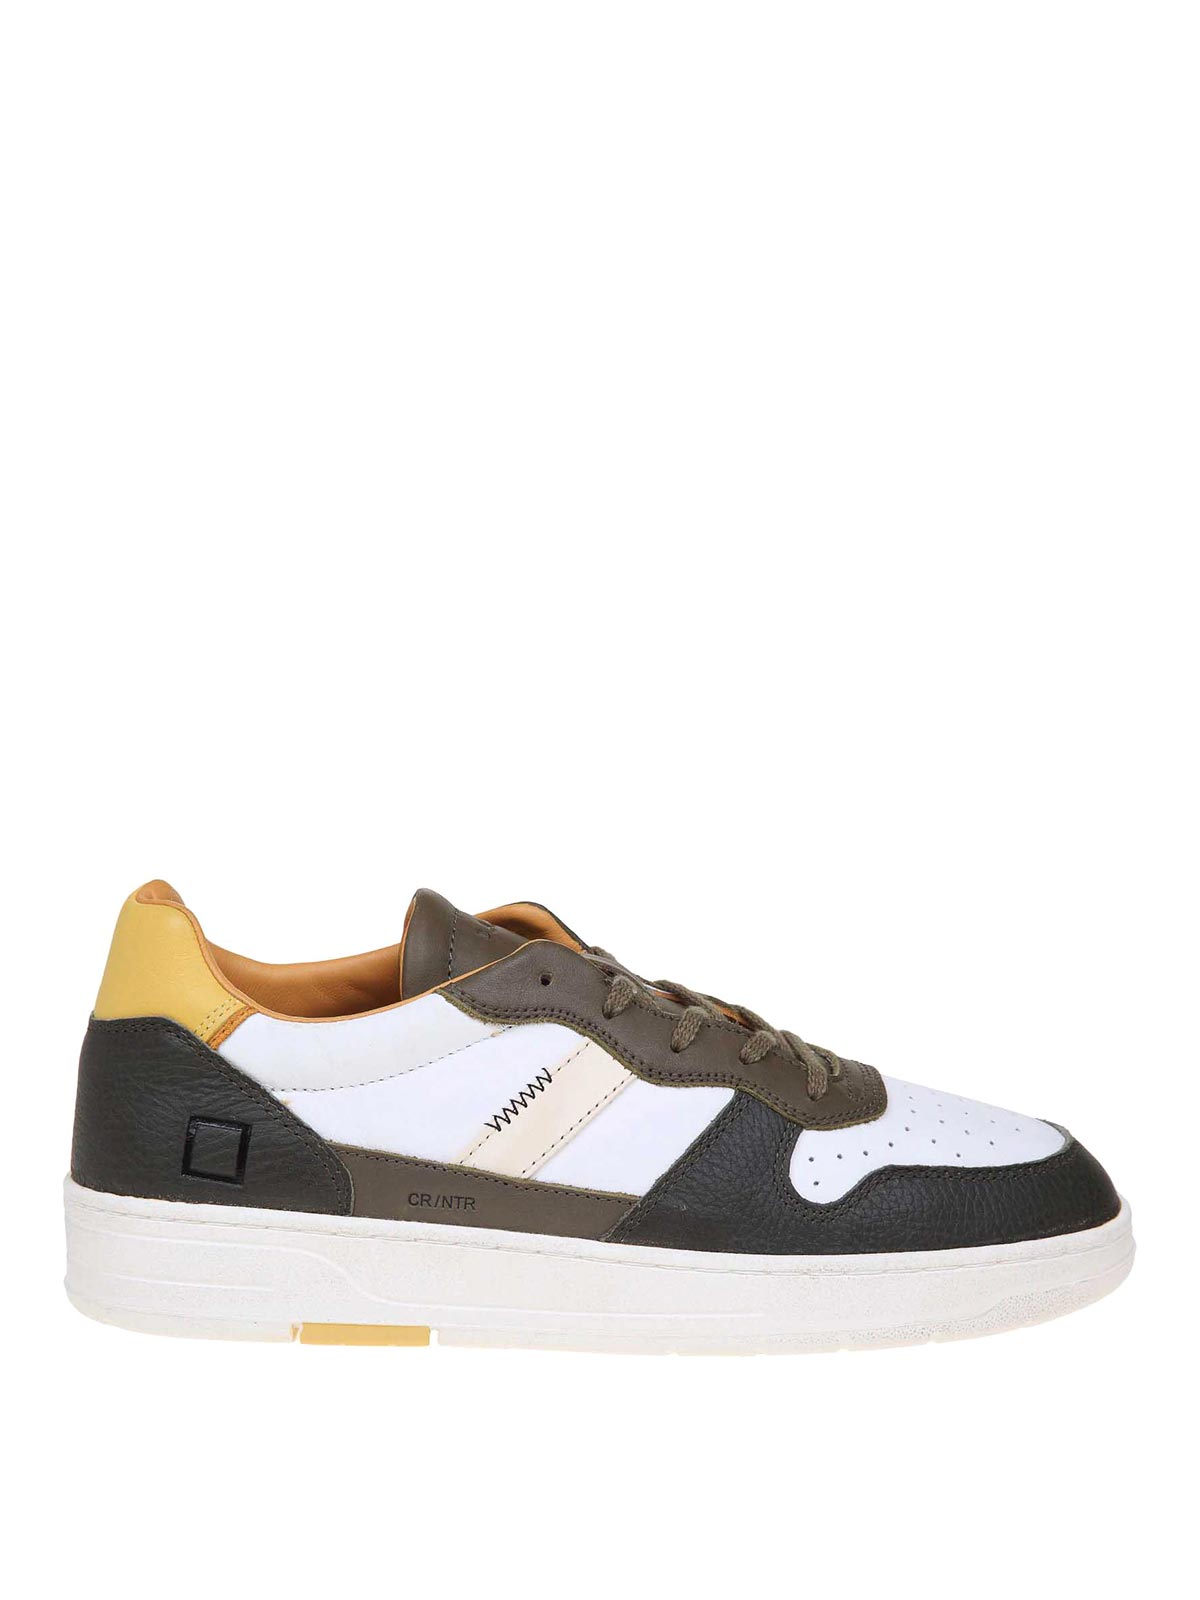 Shop Date Court 20 Sneakers In White And Green Leather